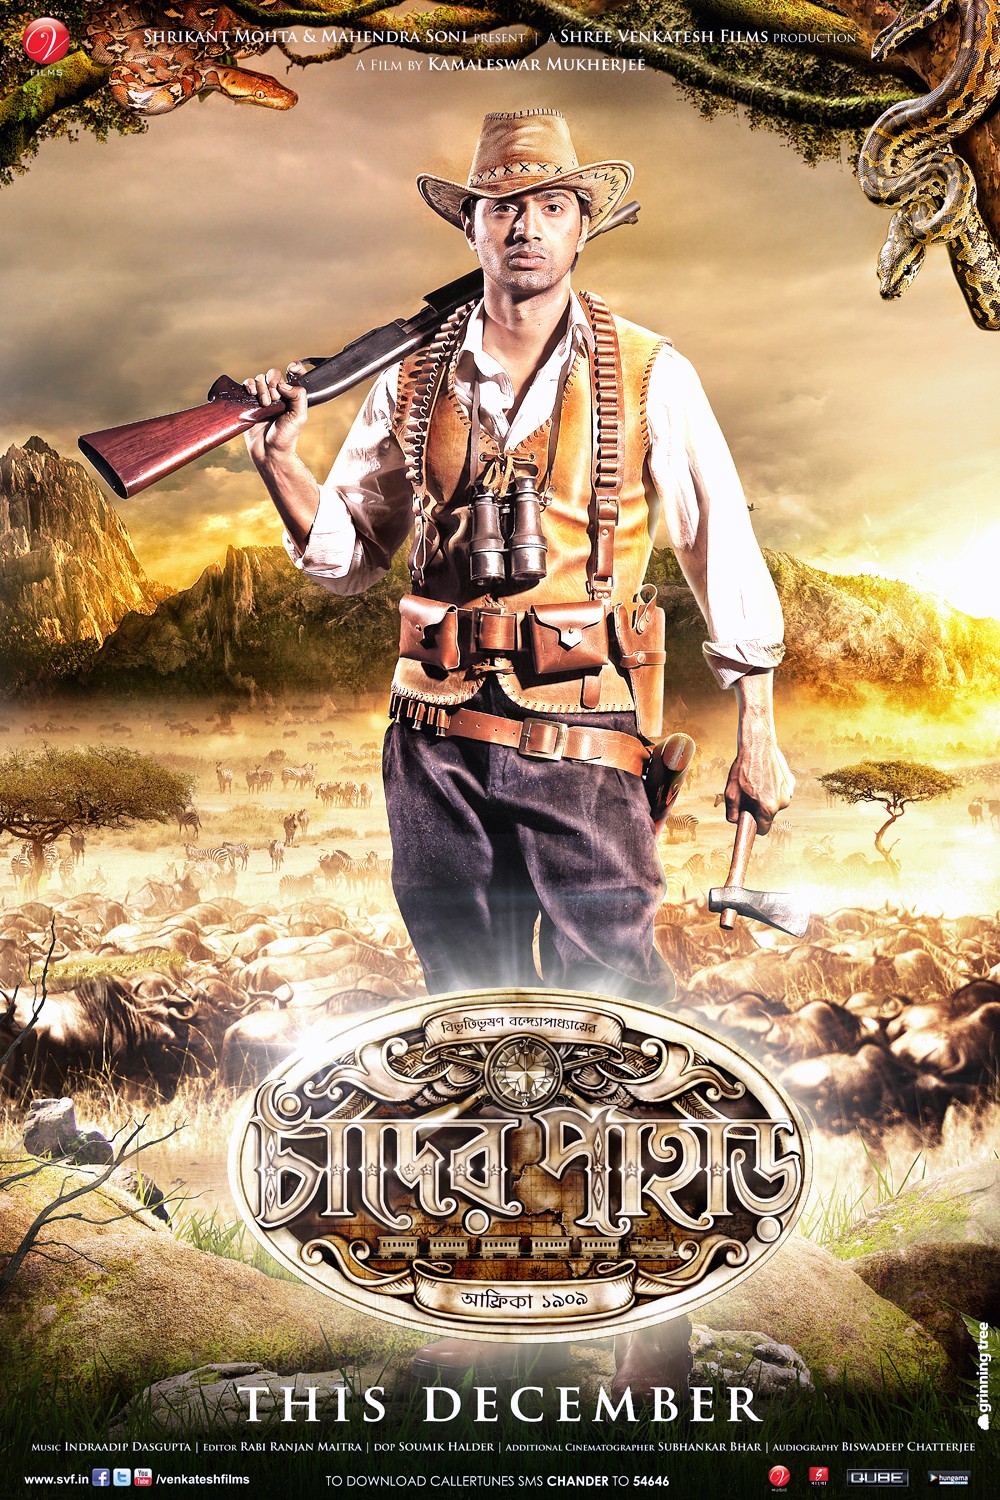 Extra Large Movie Poster Image for Chander Pahar (#4 of 6)